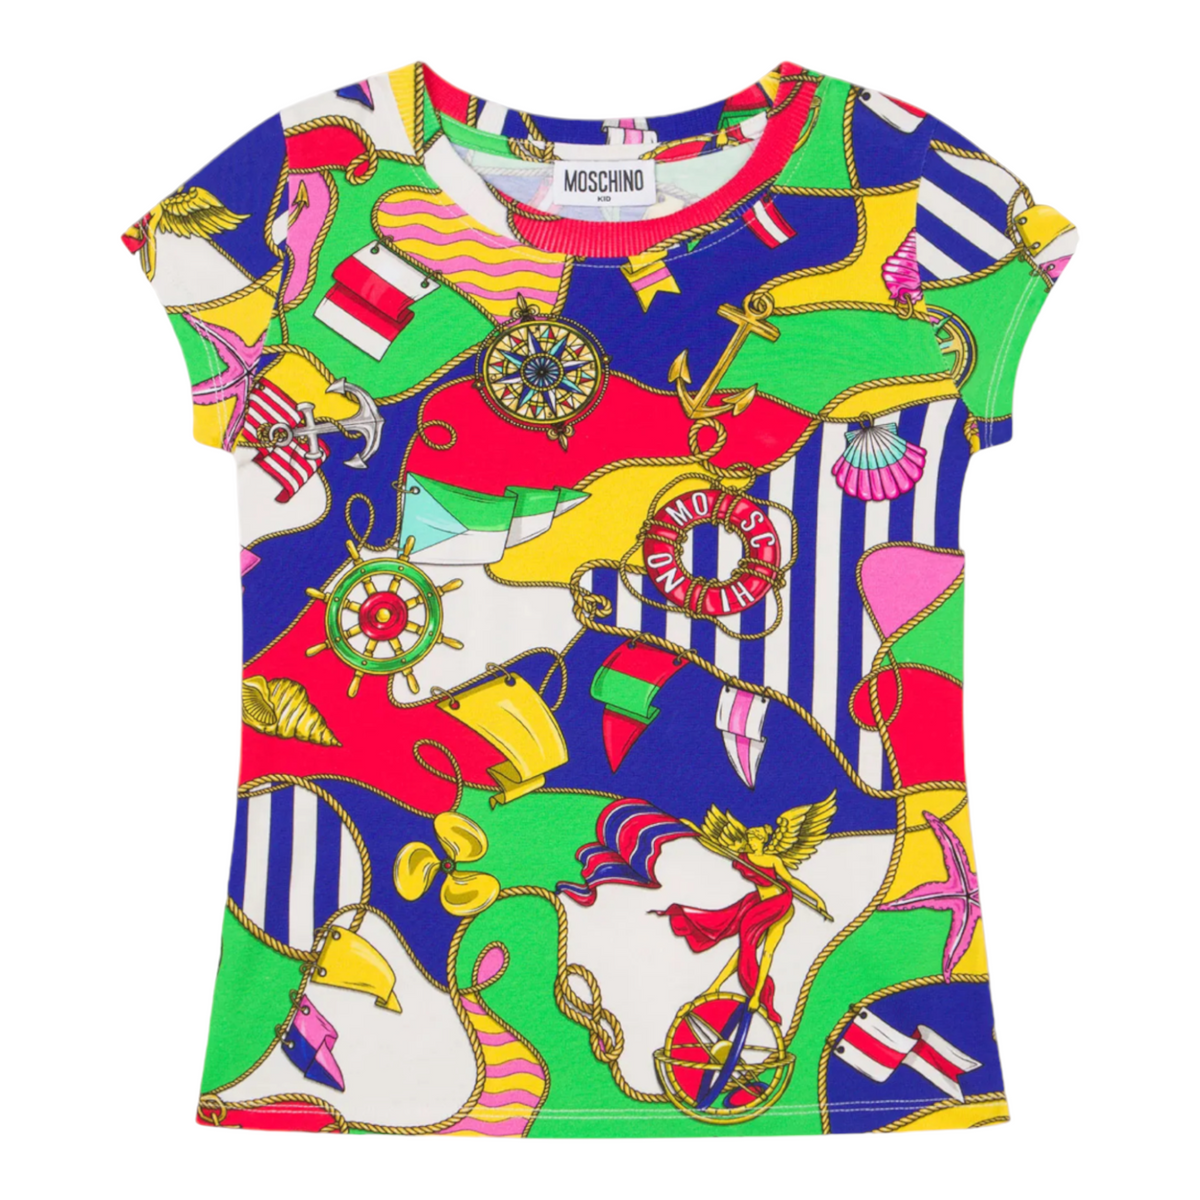 Moschino Kid's Sailing All Over Graphic Print T-Shirt